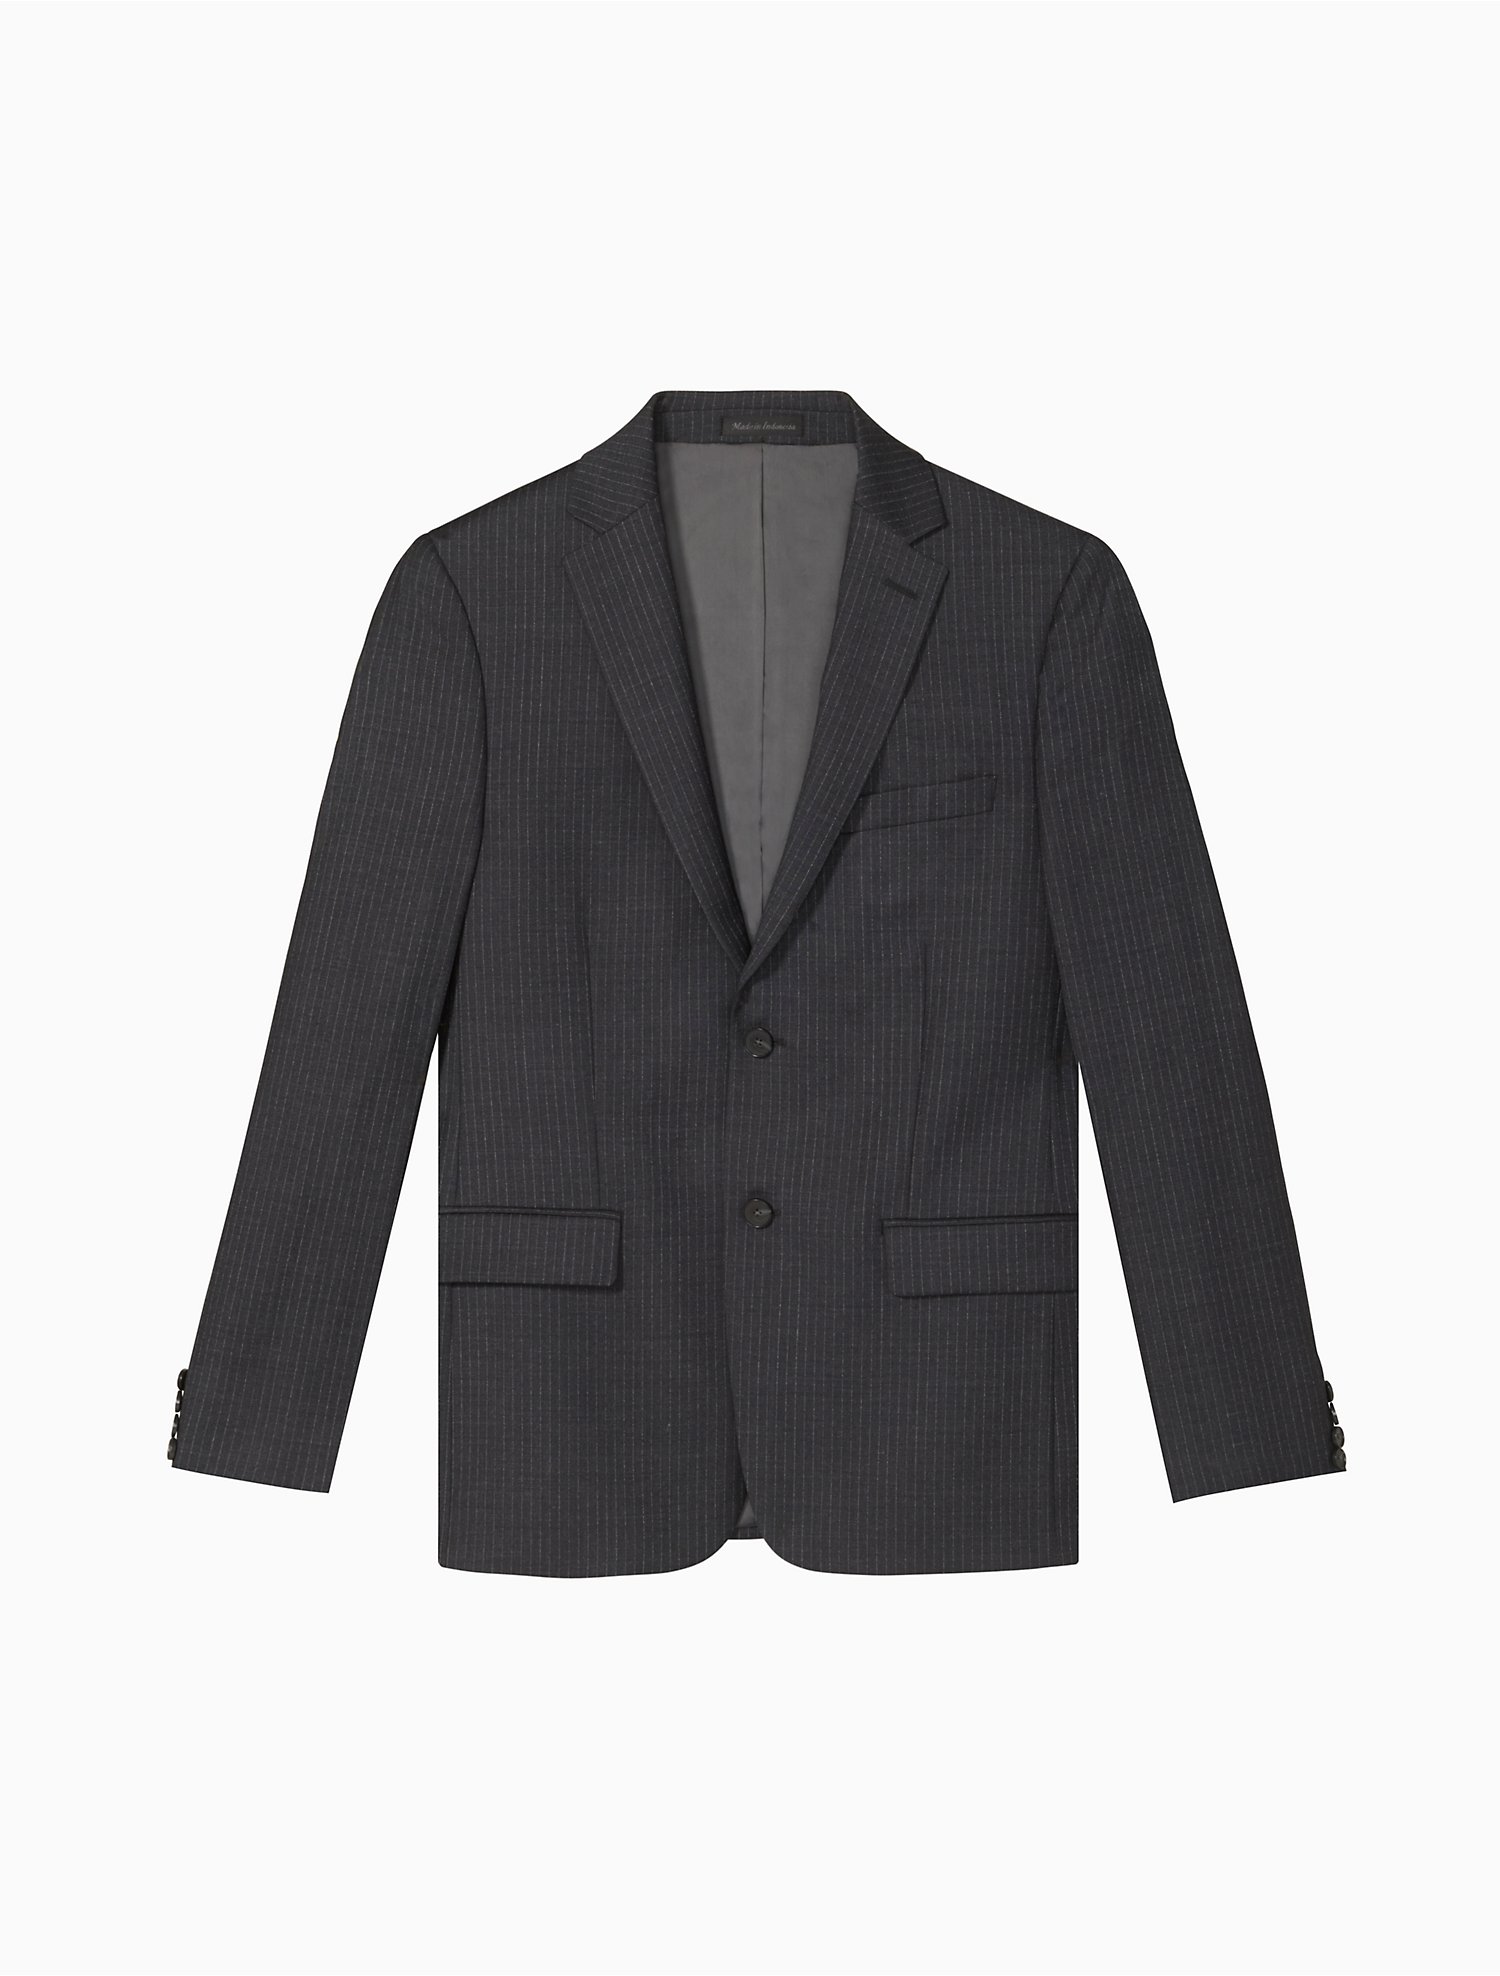 Hassy Bedreven Met andere bands Skinny Fit Charcoal Pinstripe 2-Button Jacket | Calvin Klein® USA